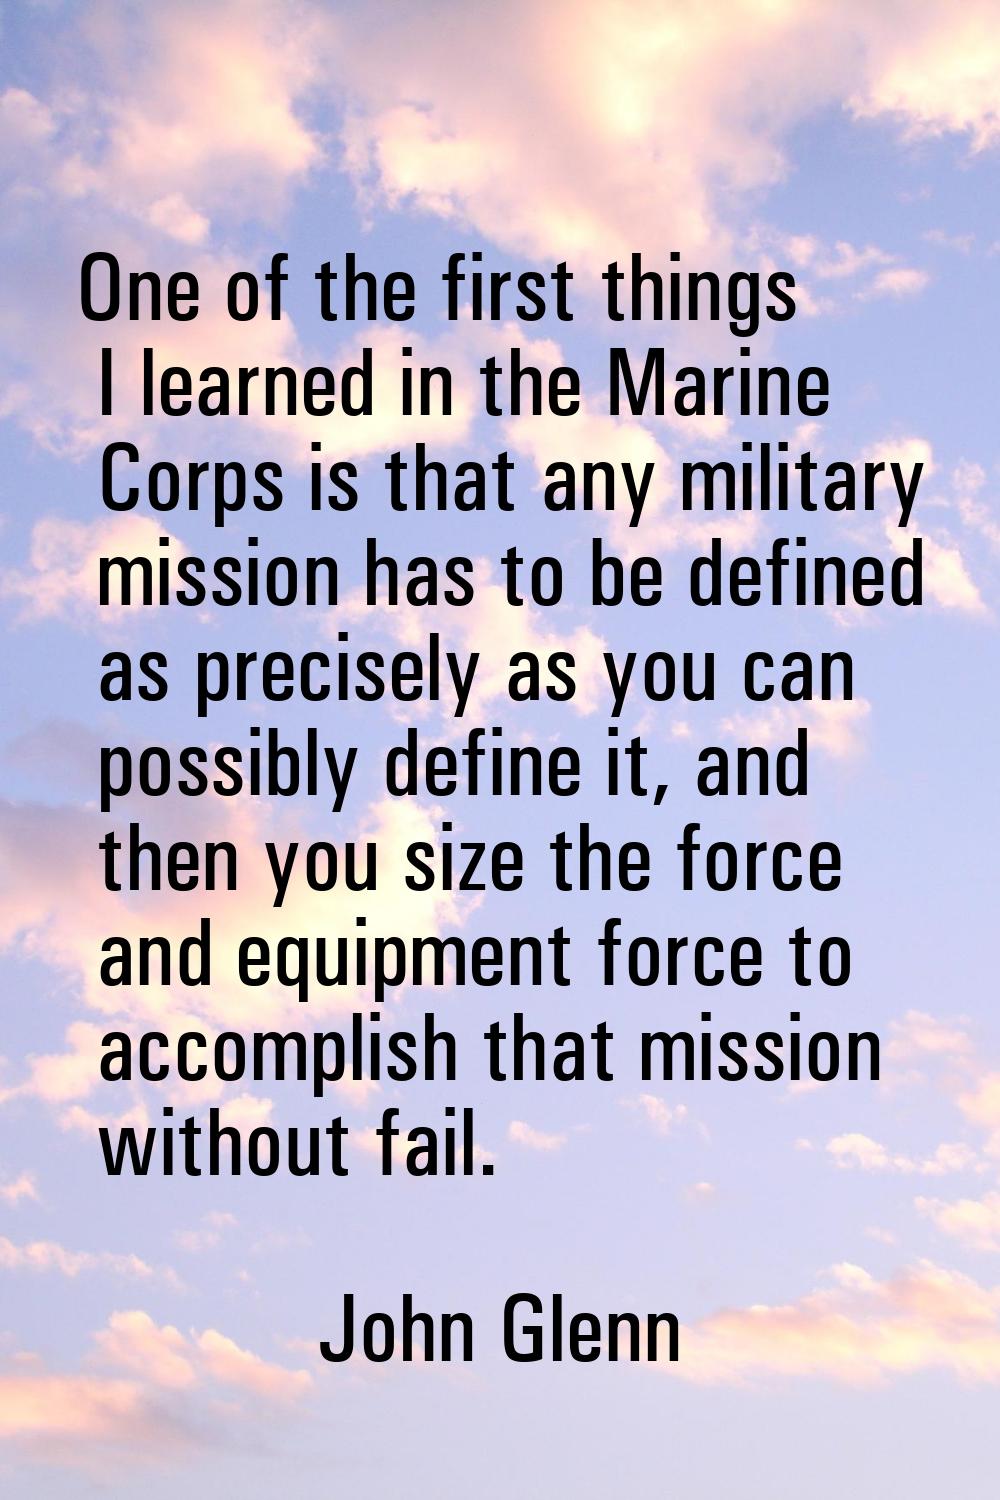 One of the first things I learned in the Marine Corps is that any military mission has to be define